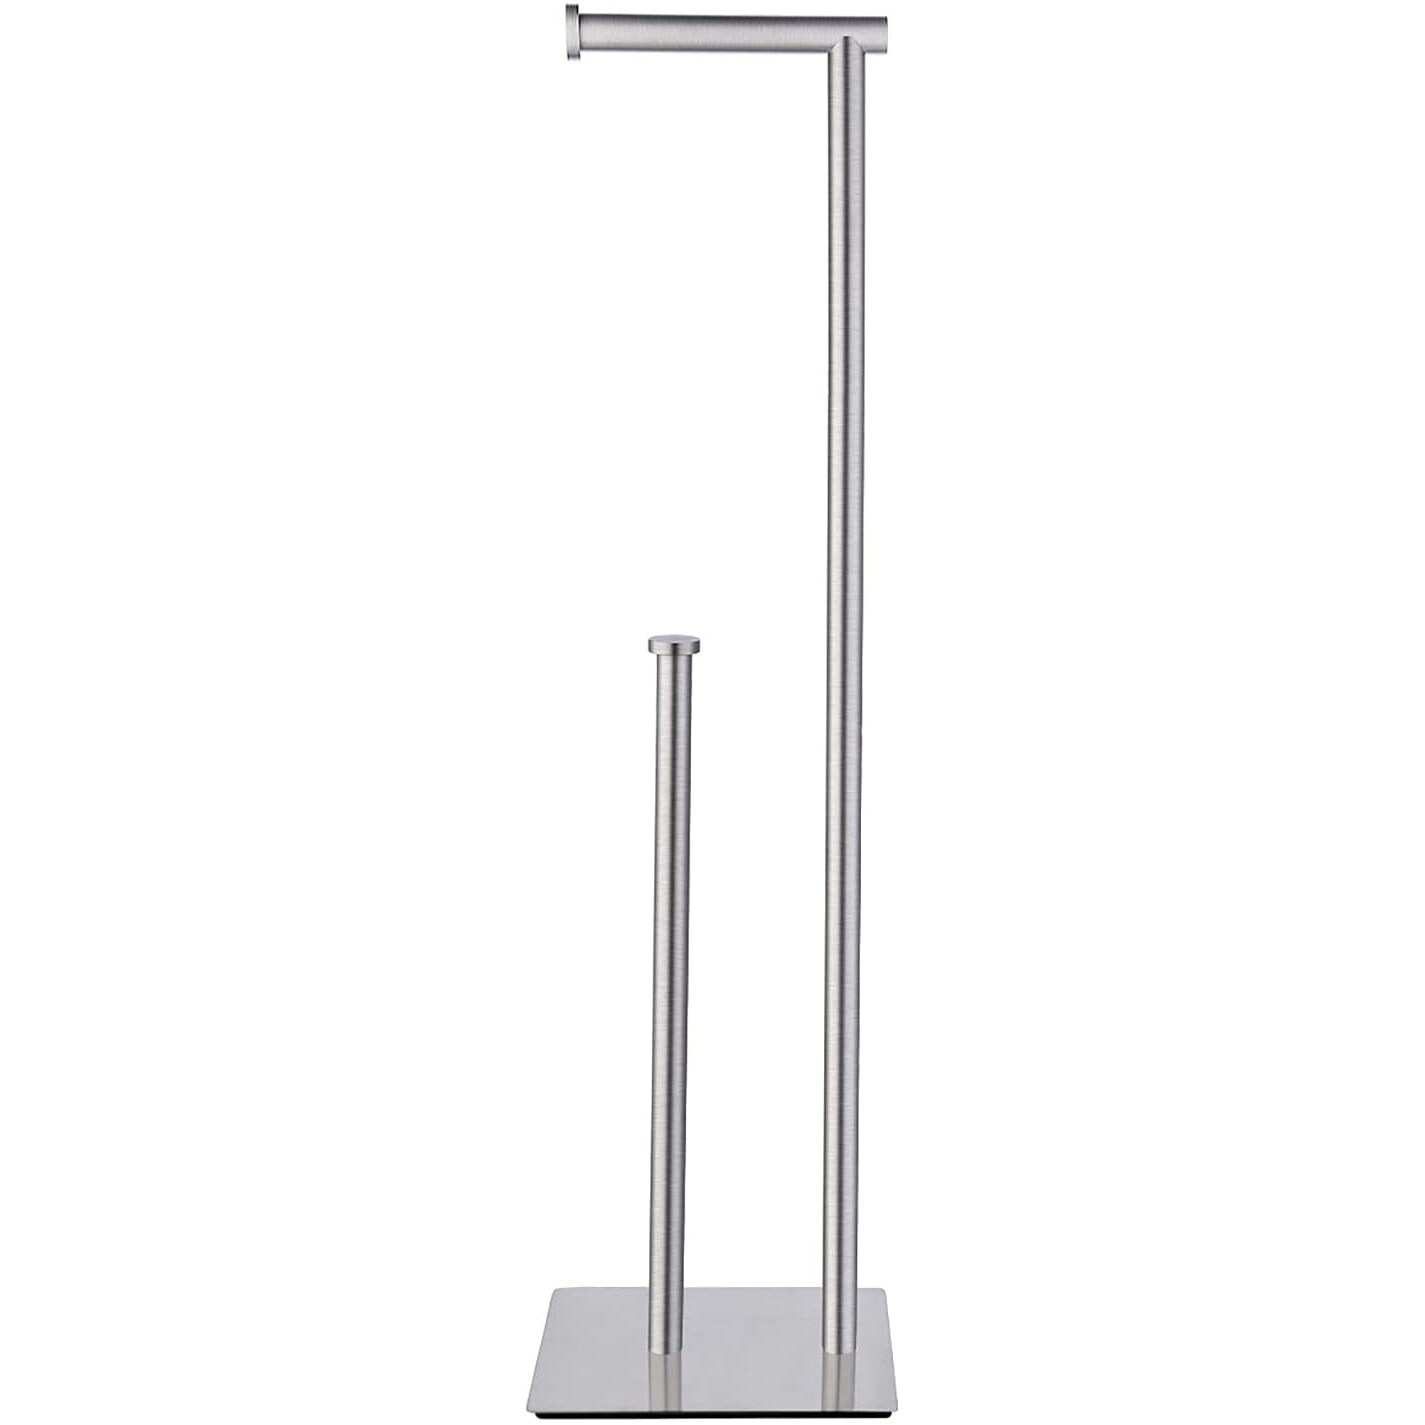 https://ak1.ostkcdn.com/images/products/is/images/direct/45e04a8ae32f9855bfbcd3ada6725e156c99230a/29%22-Height-Freestanding-Toilet-Paper-Holder-with-Reserve.jpg